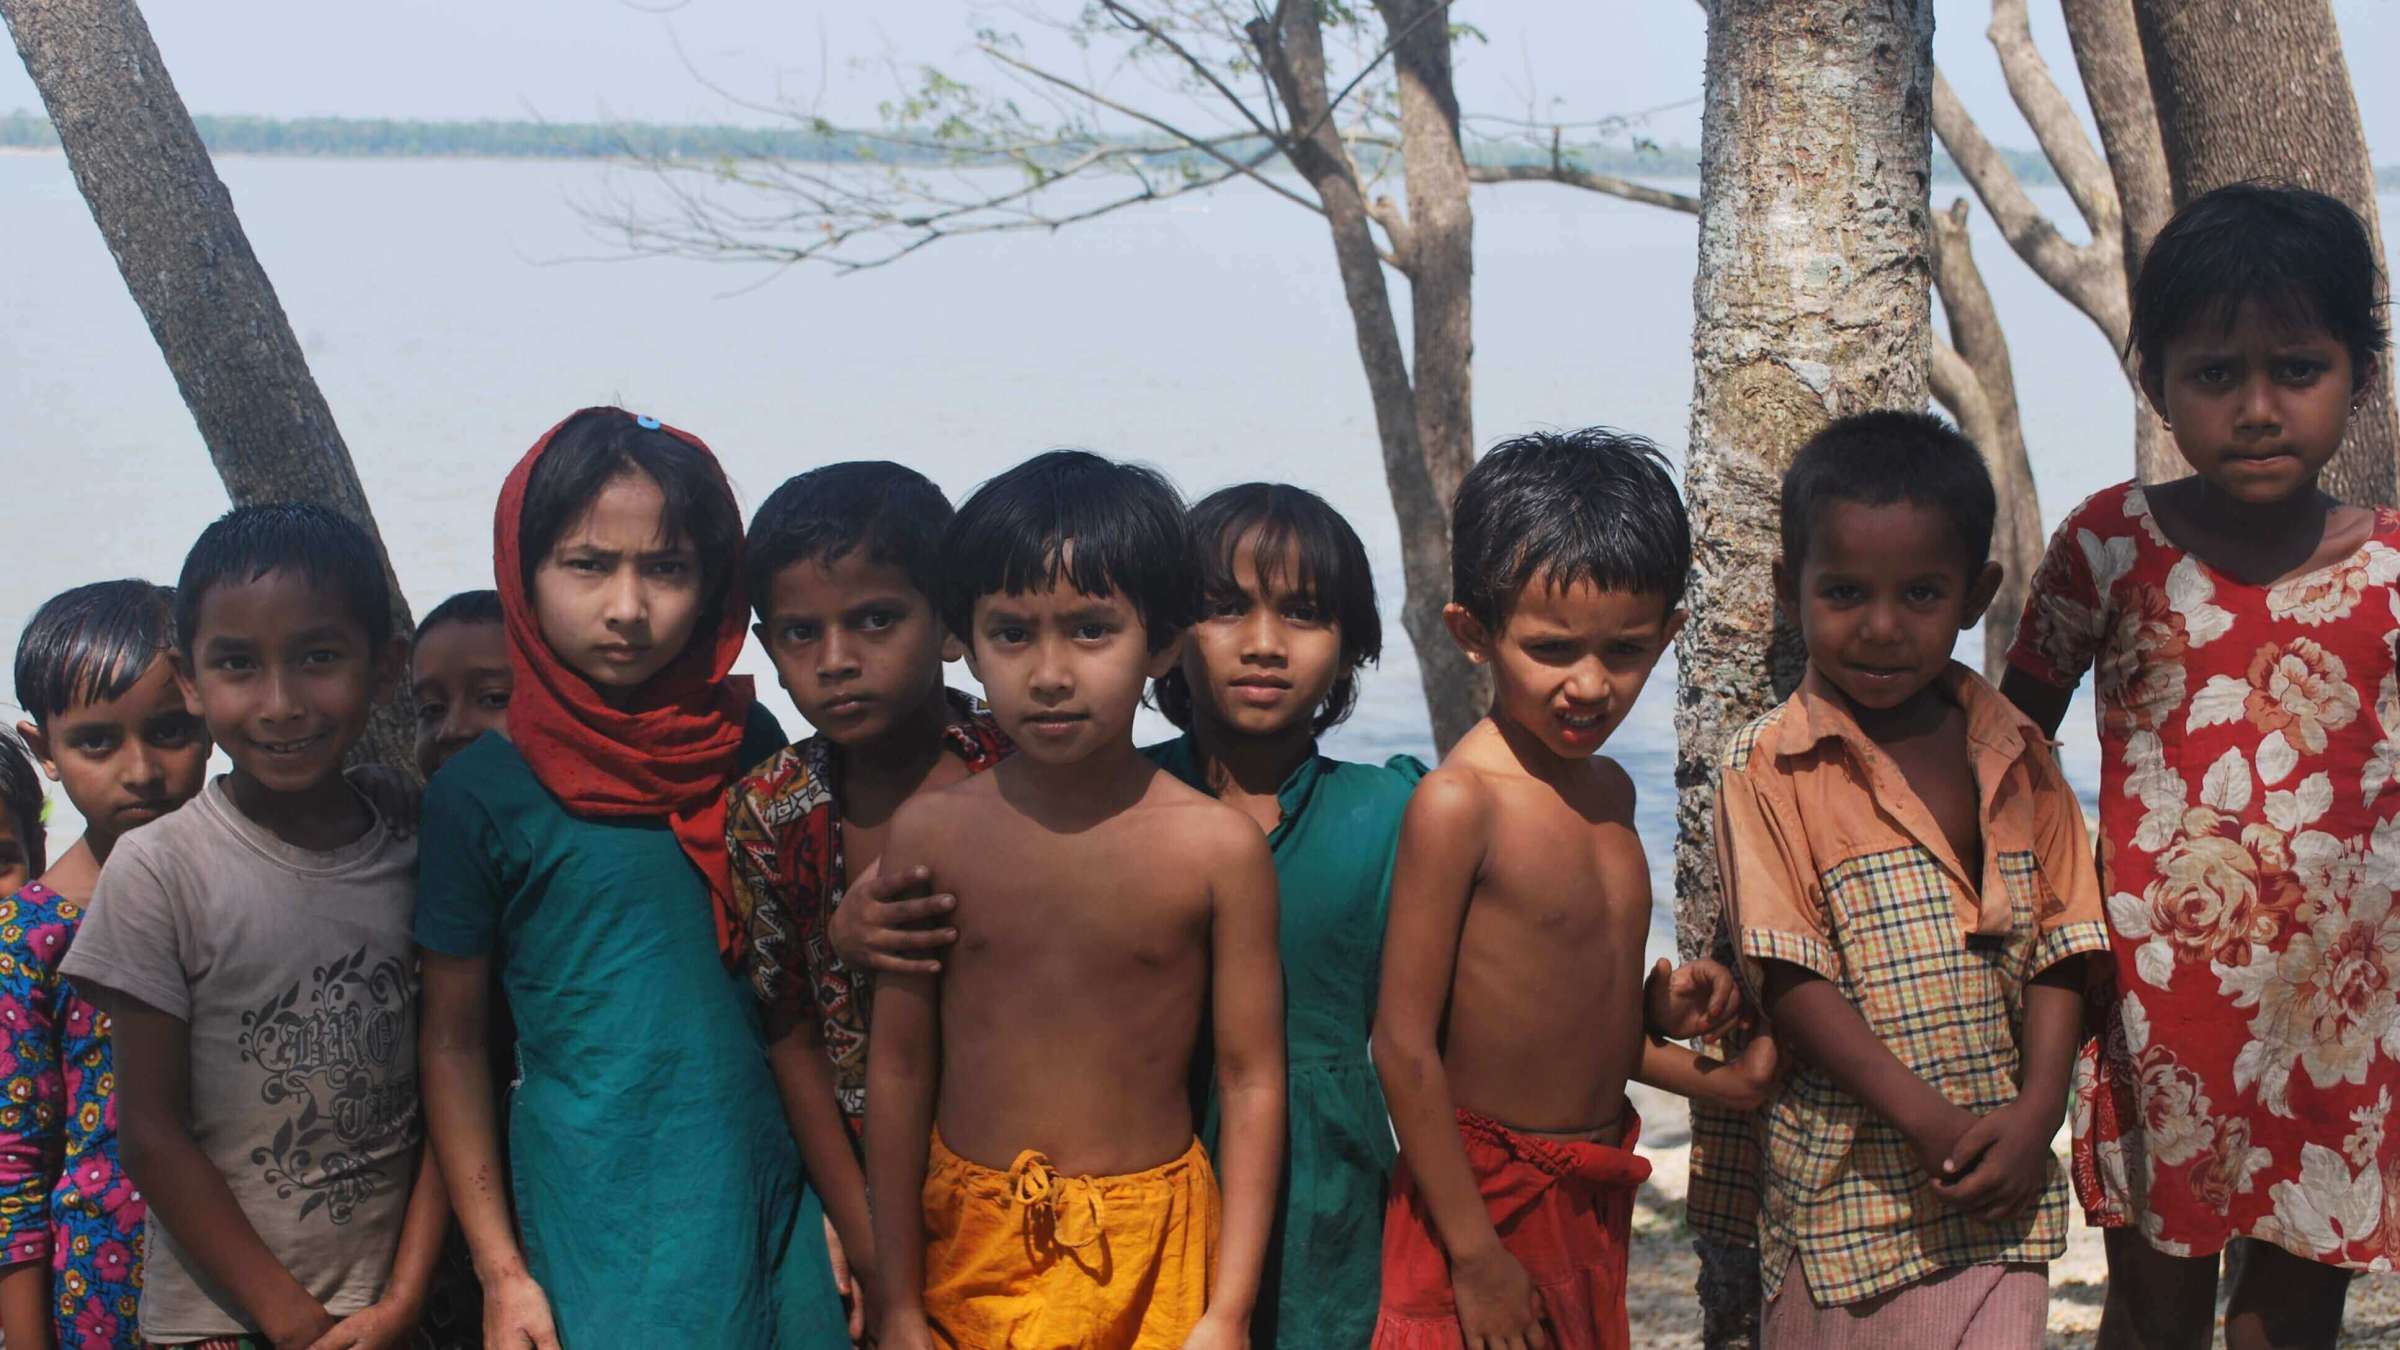 SAR Region: Beneficiaries of agriculture and disaster risk reduction project in Bangladesh